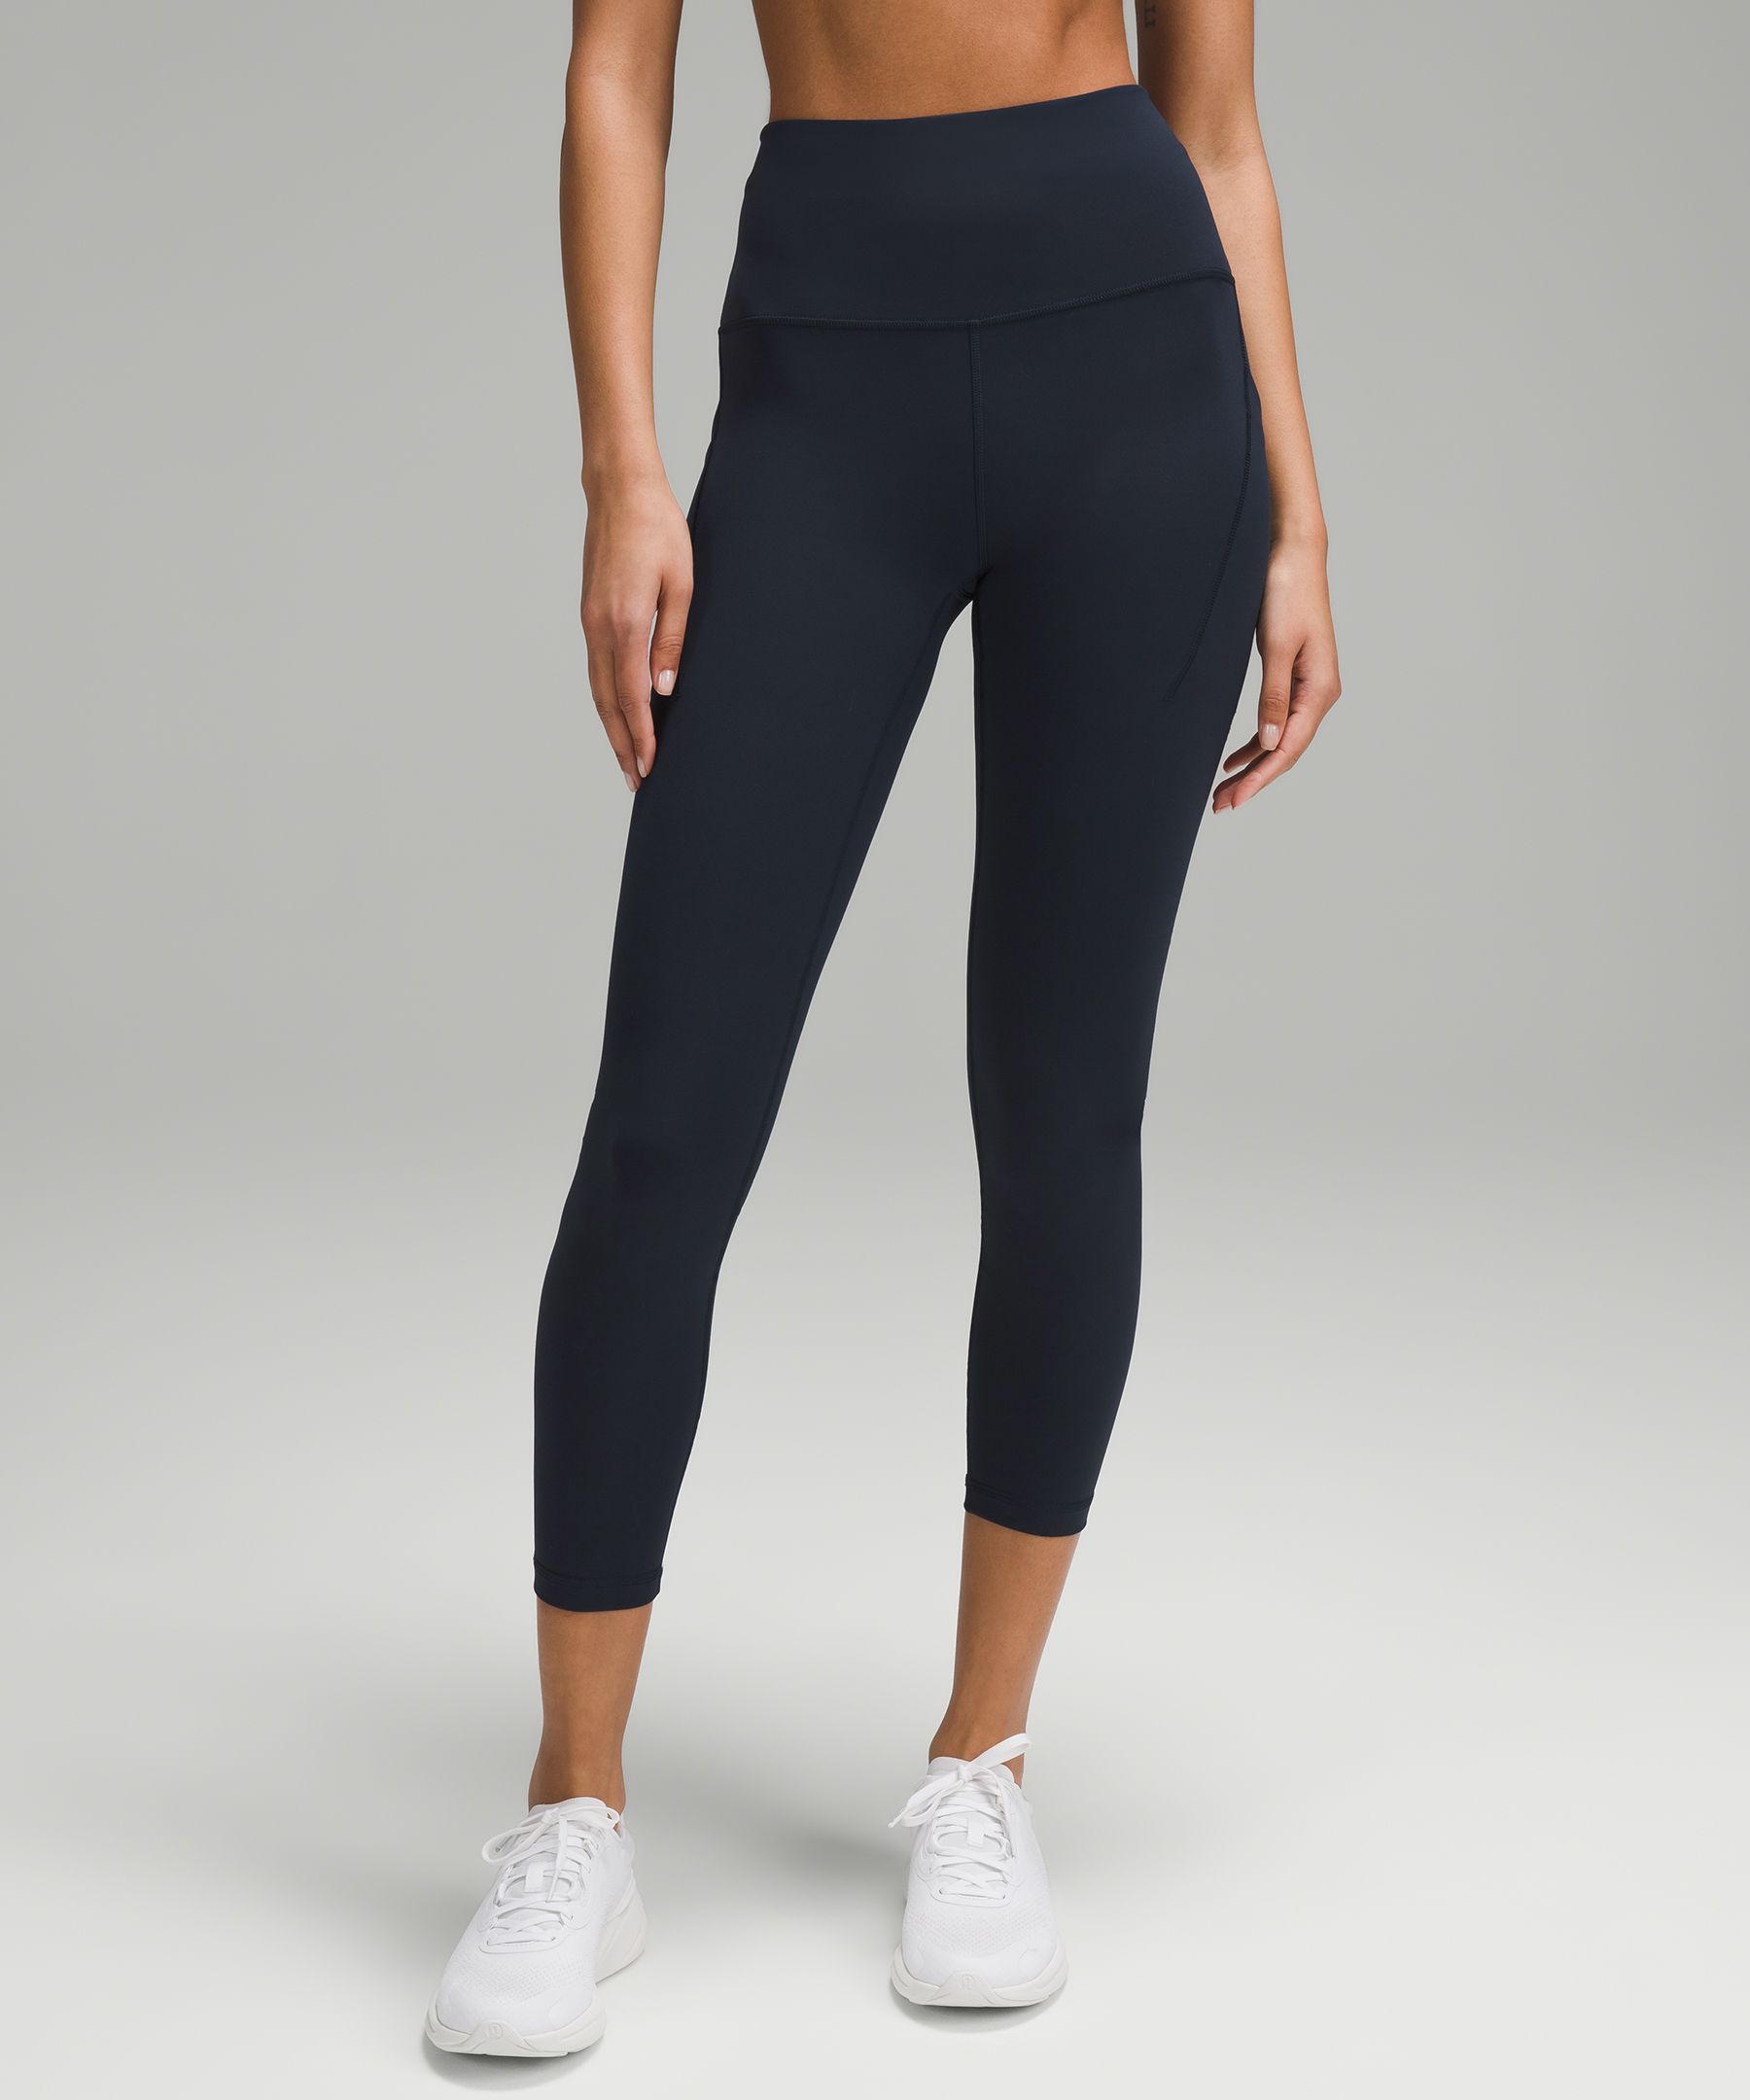 High Waisted Crossover Leggings Hold Your Haunches Leggings Petite